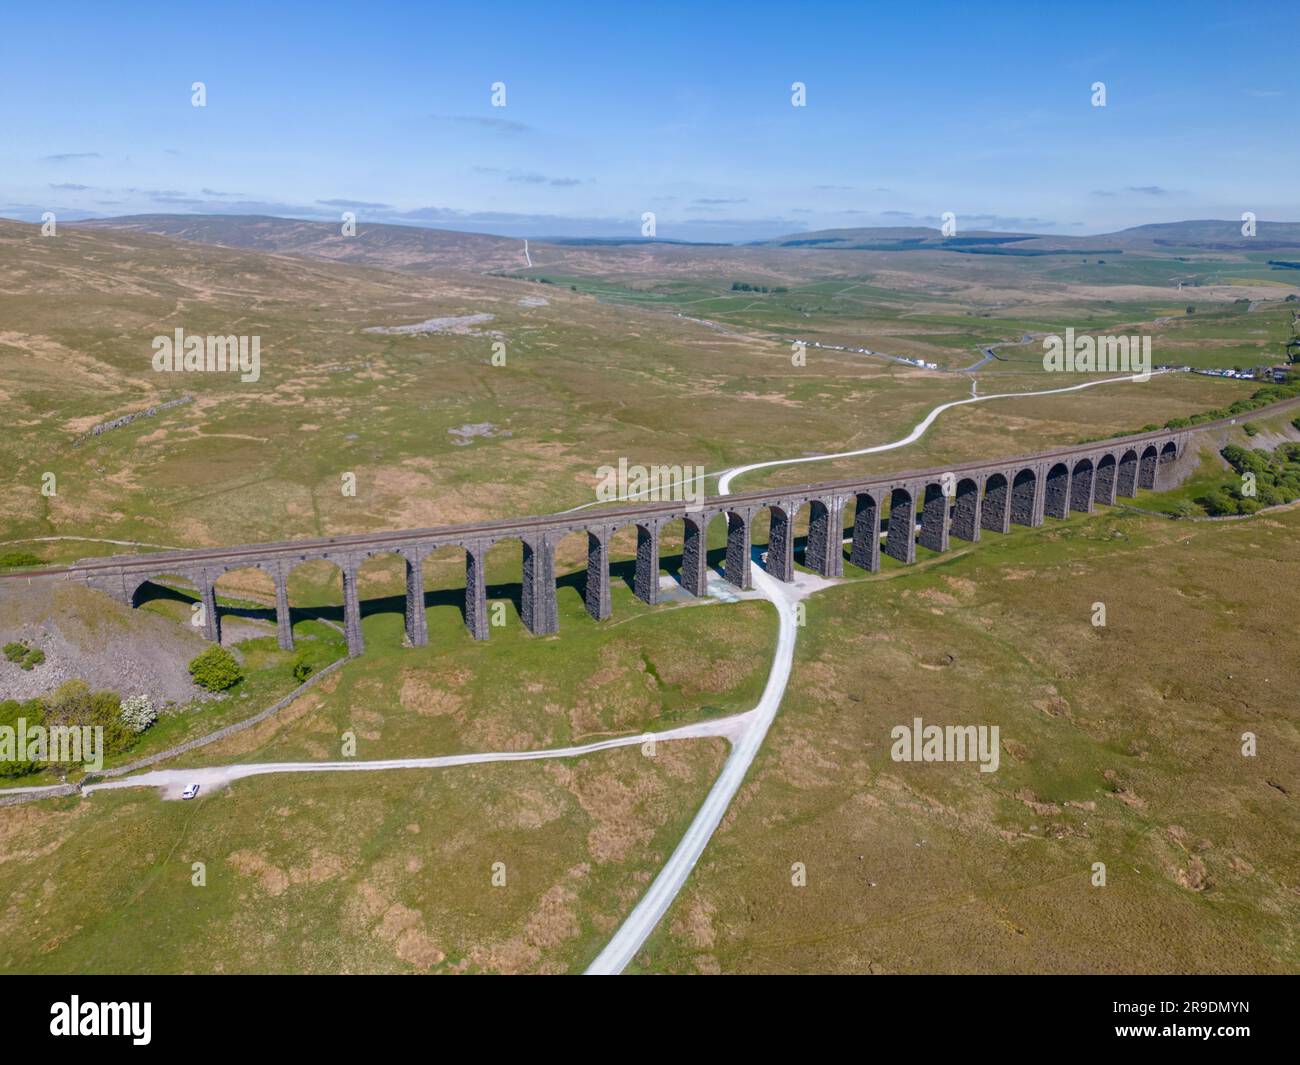 Aerial drone photo of the Ribblehead Viaduct. The large viaduct is a railway bridge in the Yorkshire Dales in England. Stock Photo